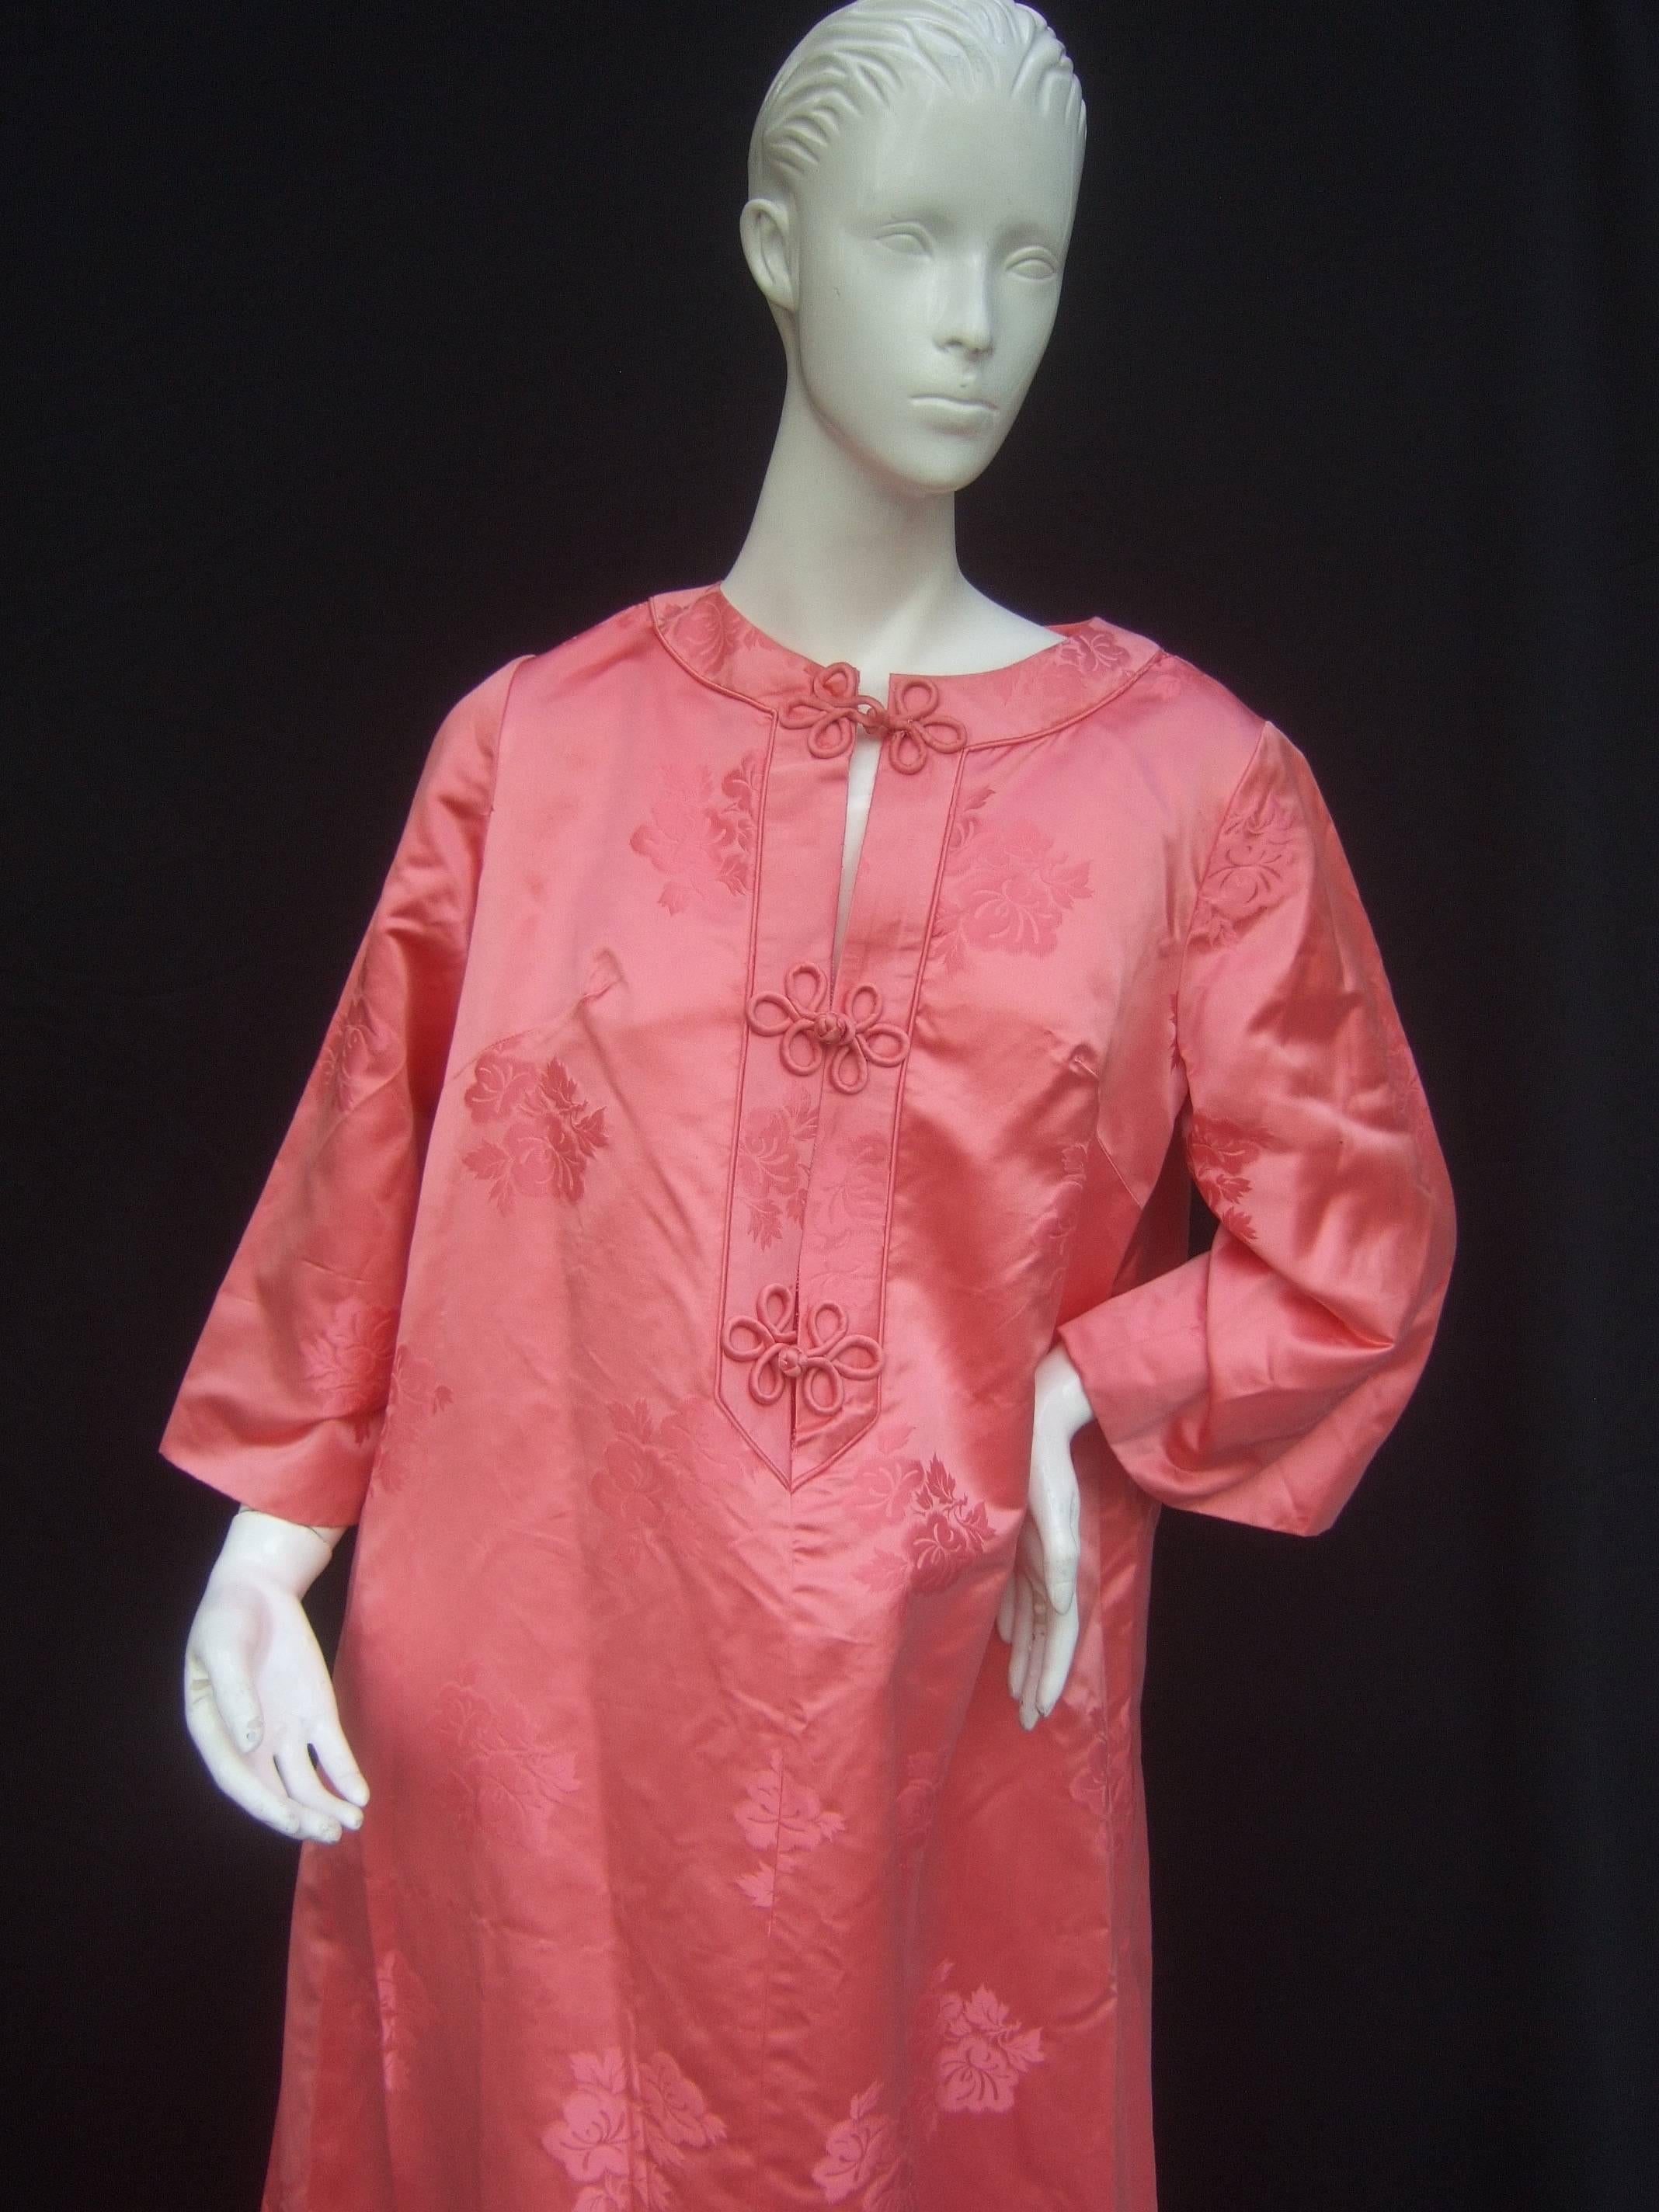 Women's Luxurious Coral Pink Satin Damask Caftan Gown c 1970s